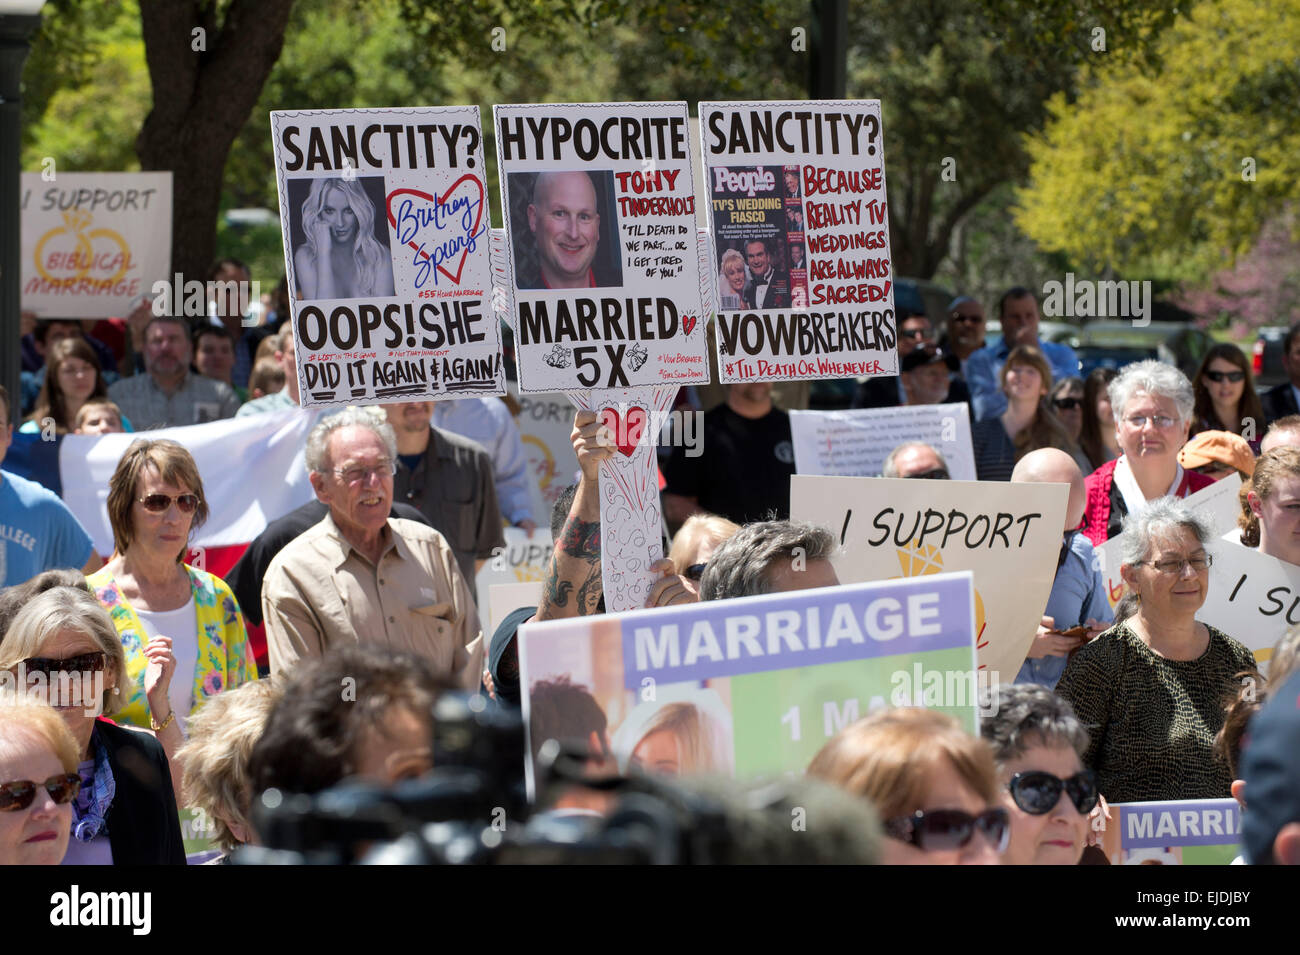 A counter protester holds a sign mocking the sanctity of marriage at a rally opposing gay marriage at Texas Capitol in Austin Stock Photo